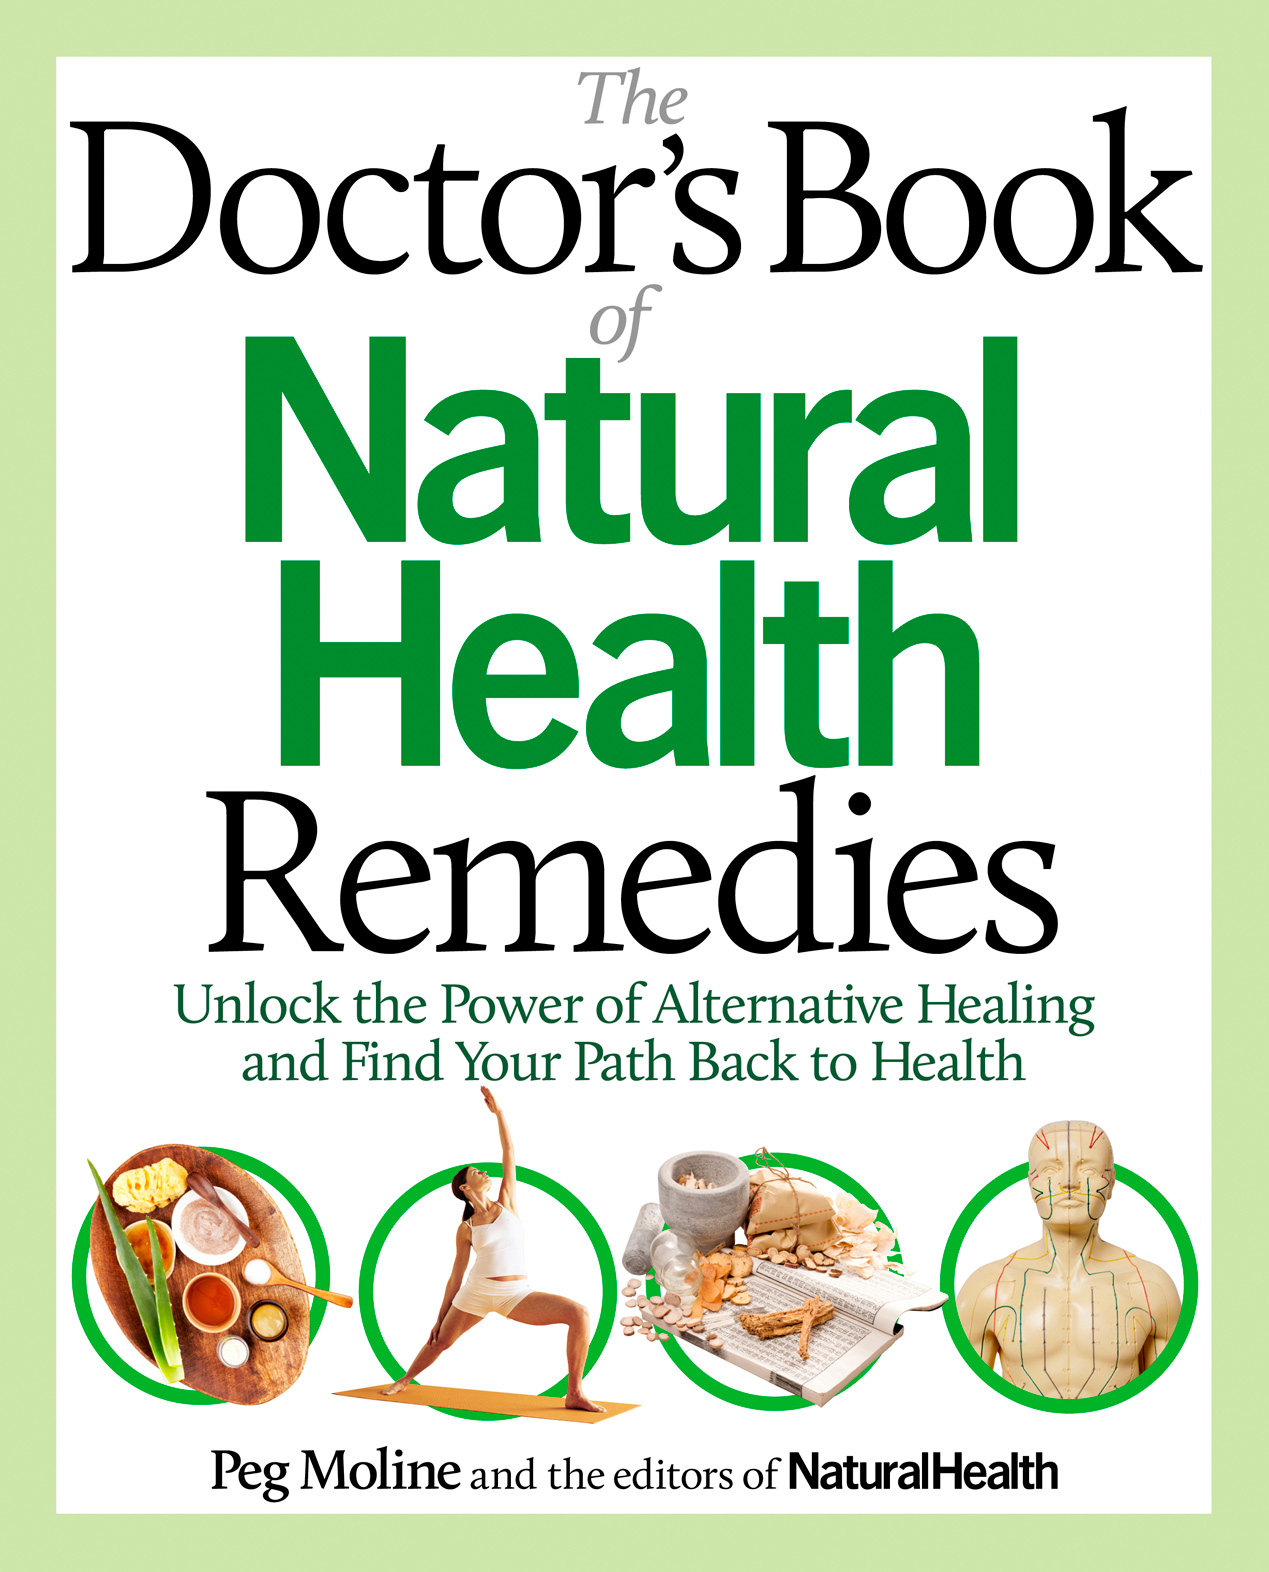 The Doctors Book of Natural Health Remedies Unlock the Power of Alternative Healing and Find Your Path Back to Health - photo 1